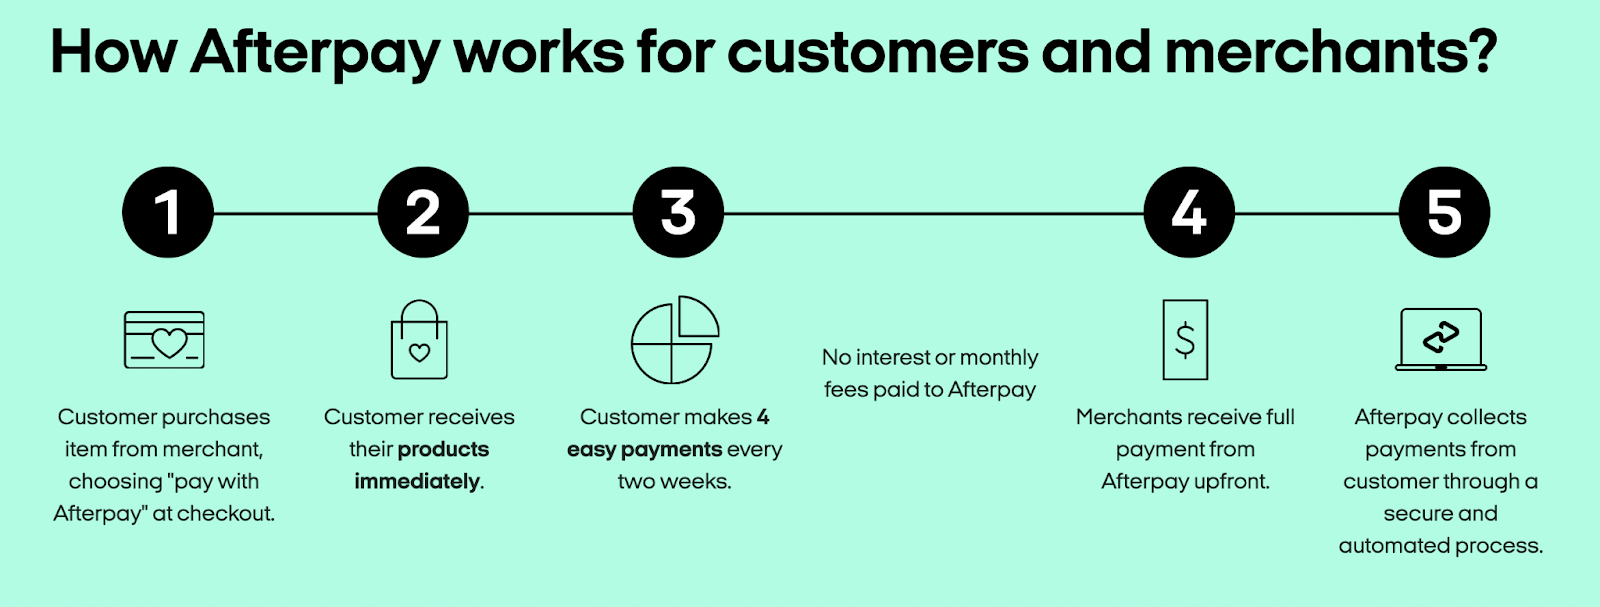 explanation of how afterpay is benficial for both customers and merchants